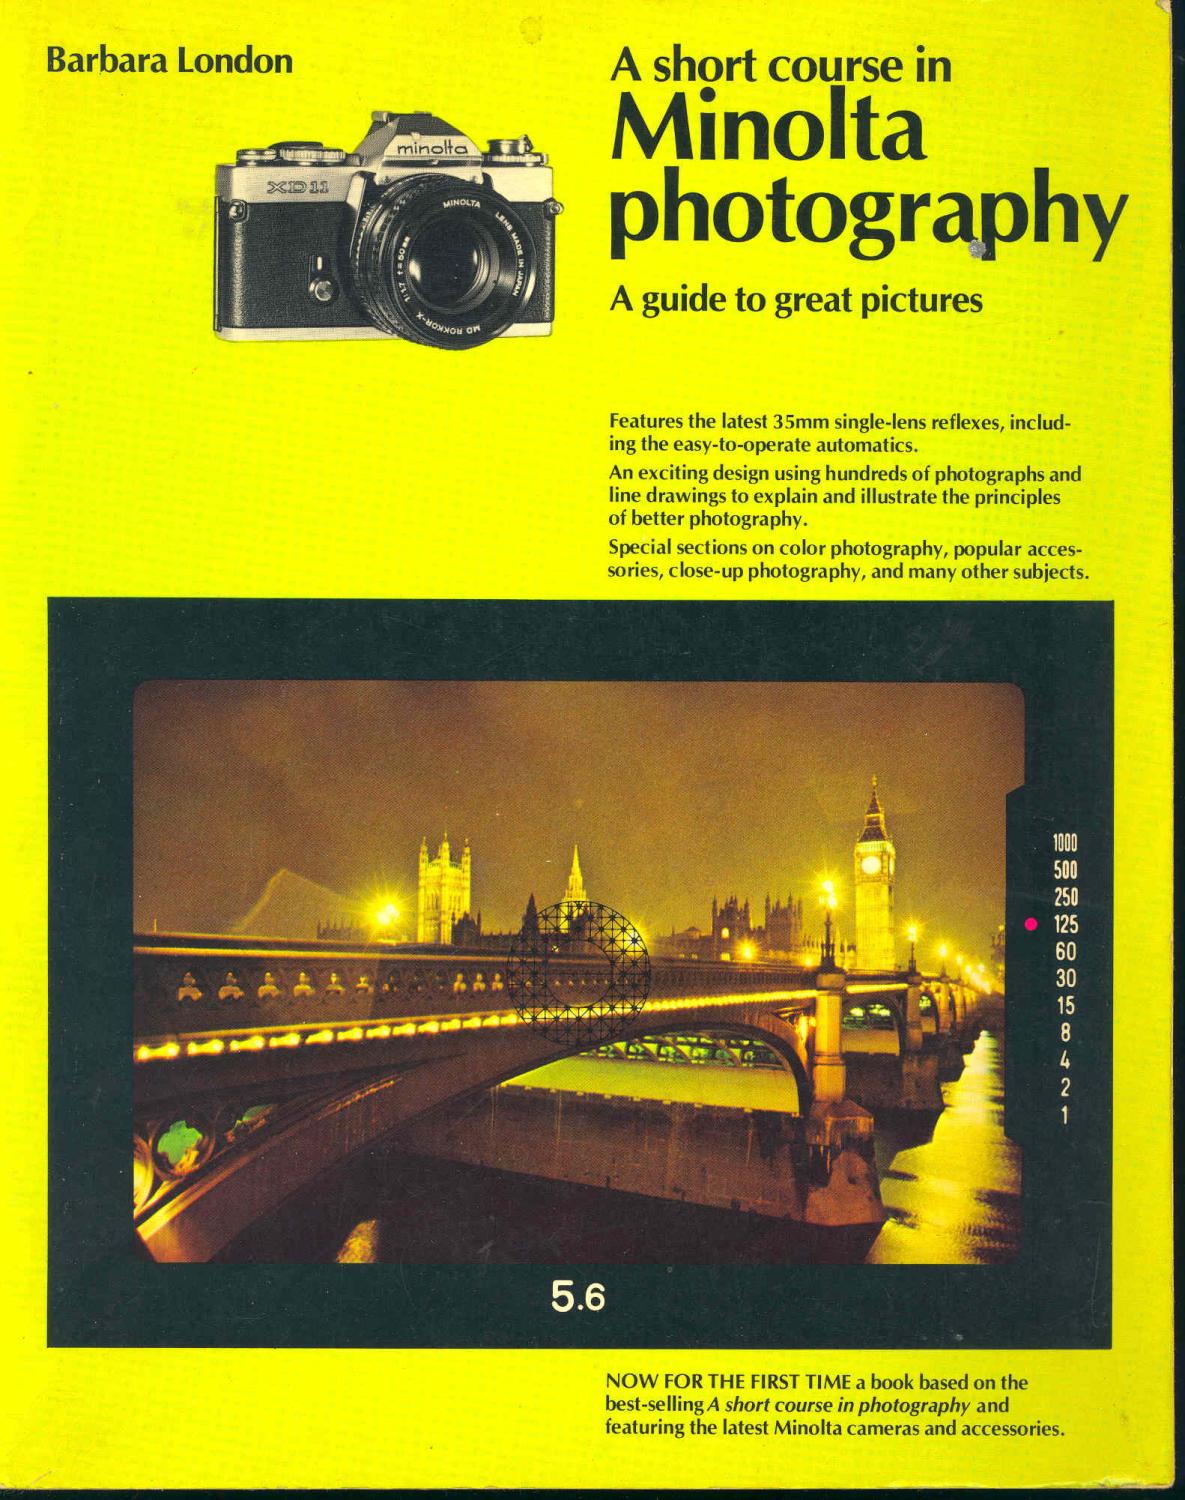 A short course in Minolta photography : a guide to great pictures [The Minolta camera -- The Minolta lens -- Film and exposure -- Color -- SPecial techniques -- Lighting -- How to see like a camera -- Guide to Minolta equipment and accessories] - London, Barbara, 1936- ; photos, Fred Langmore, Charles O'Rear, Dan McCoy, Fred Ward, Bill Strode, Richard Frear, Dick Rowan, Fred E mang, Bill Gillette, Blair Pitman, Bill Marr, Michelle Bogre, Duane Dailey, Byron Schumaker, George Robinson, Dennis Curtin, Peter Laytin, Donald Dietz, Elizabeth Hamlin; design, Harold Pattek; illustrations, Laszlo Meszoly